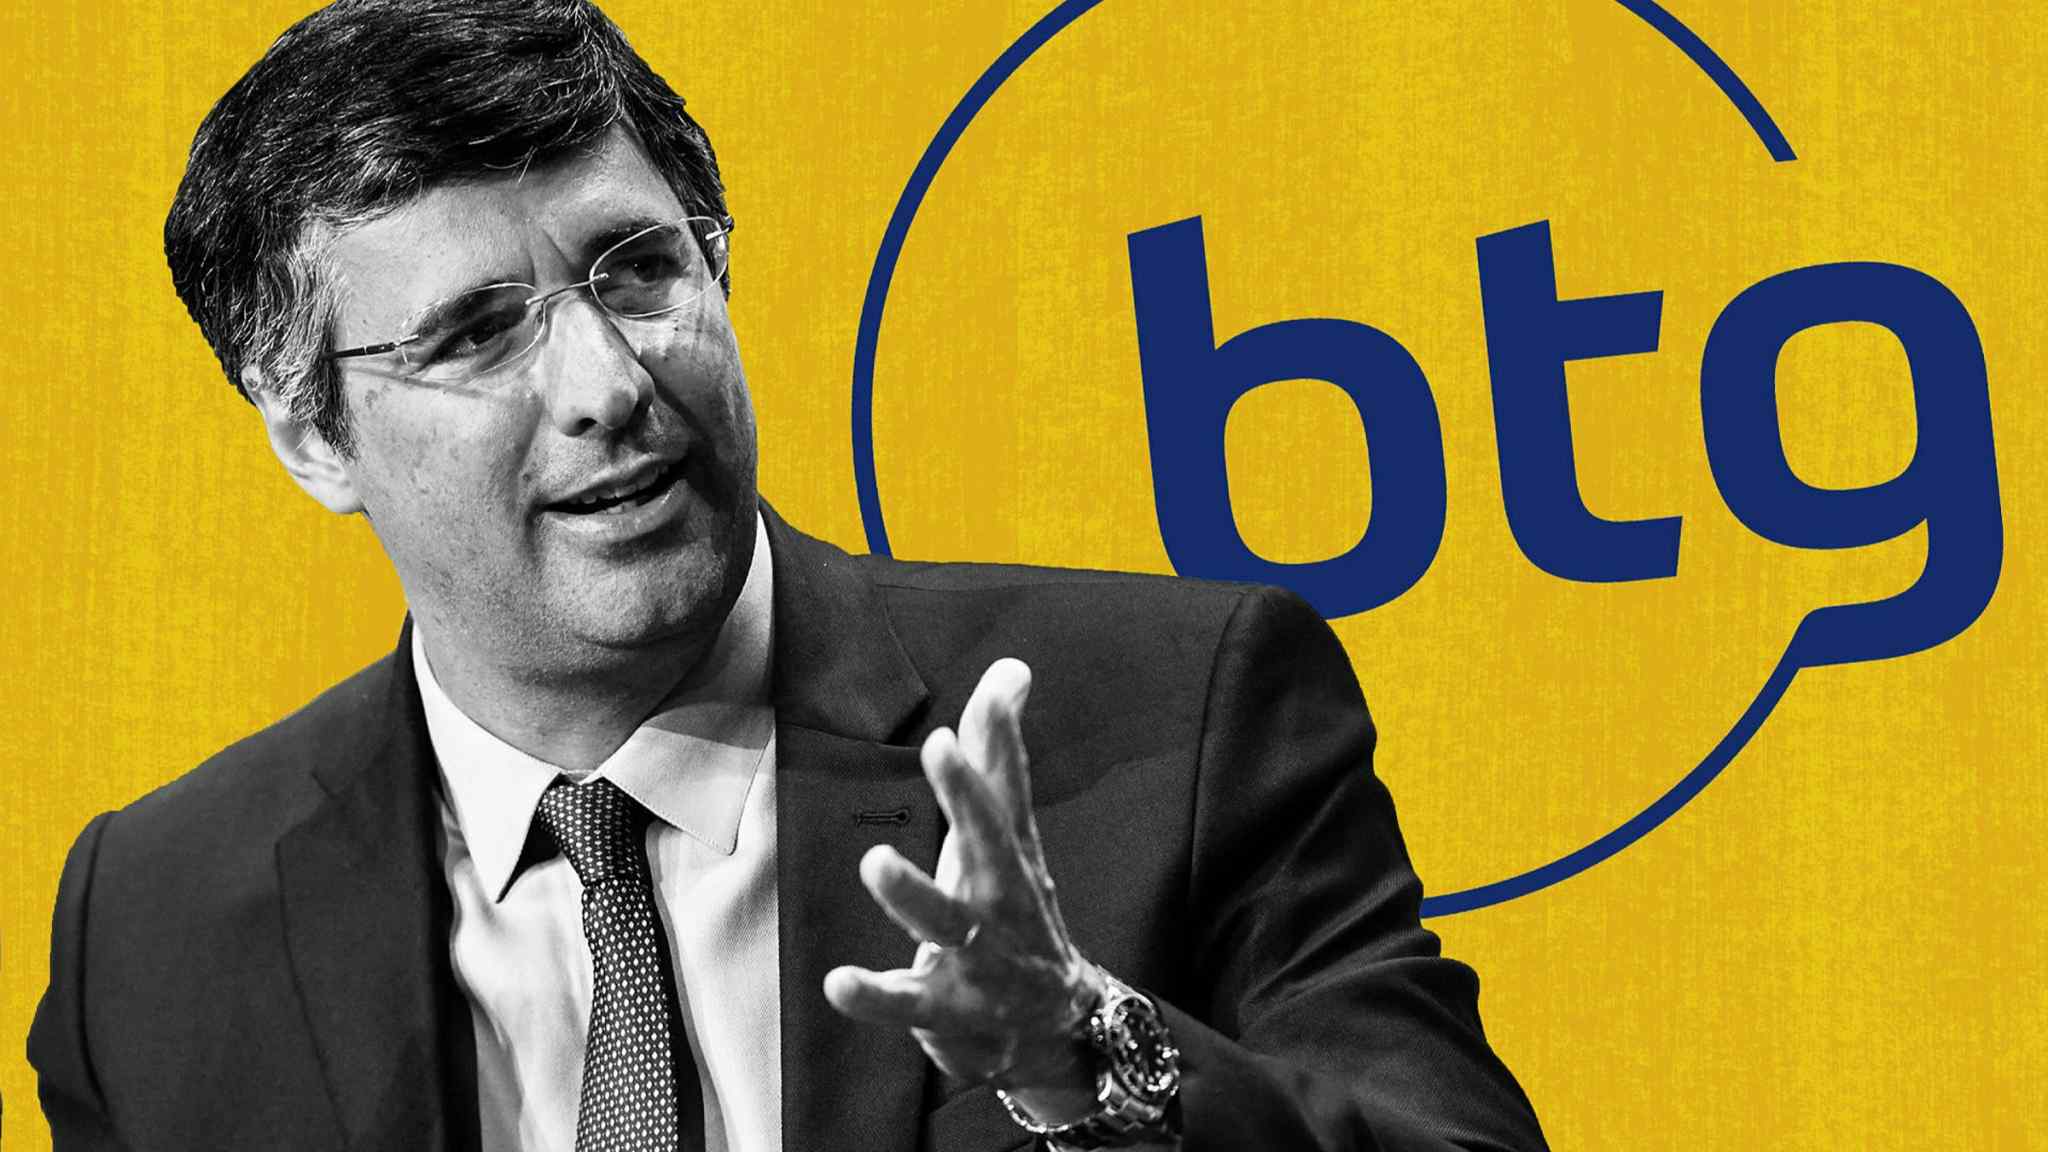 ‘Back to where he never left’: founder of Brazil’s BTG Pactual returns to fold 